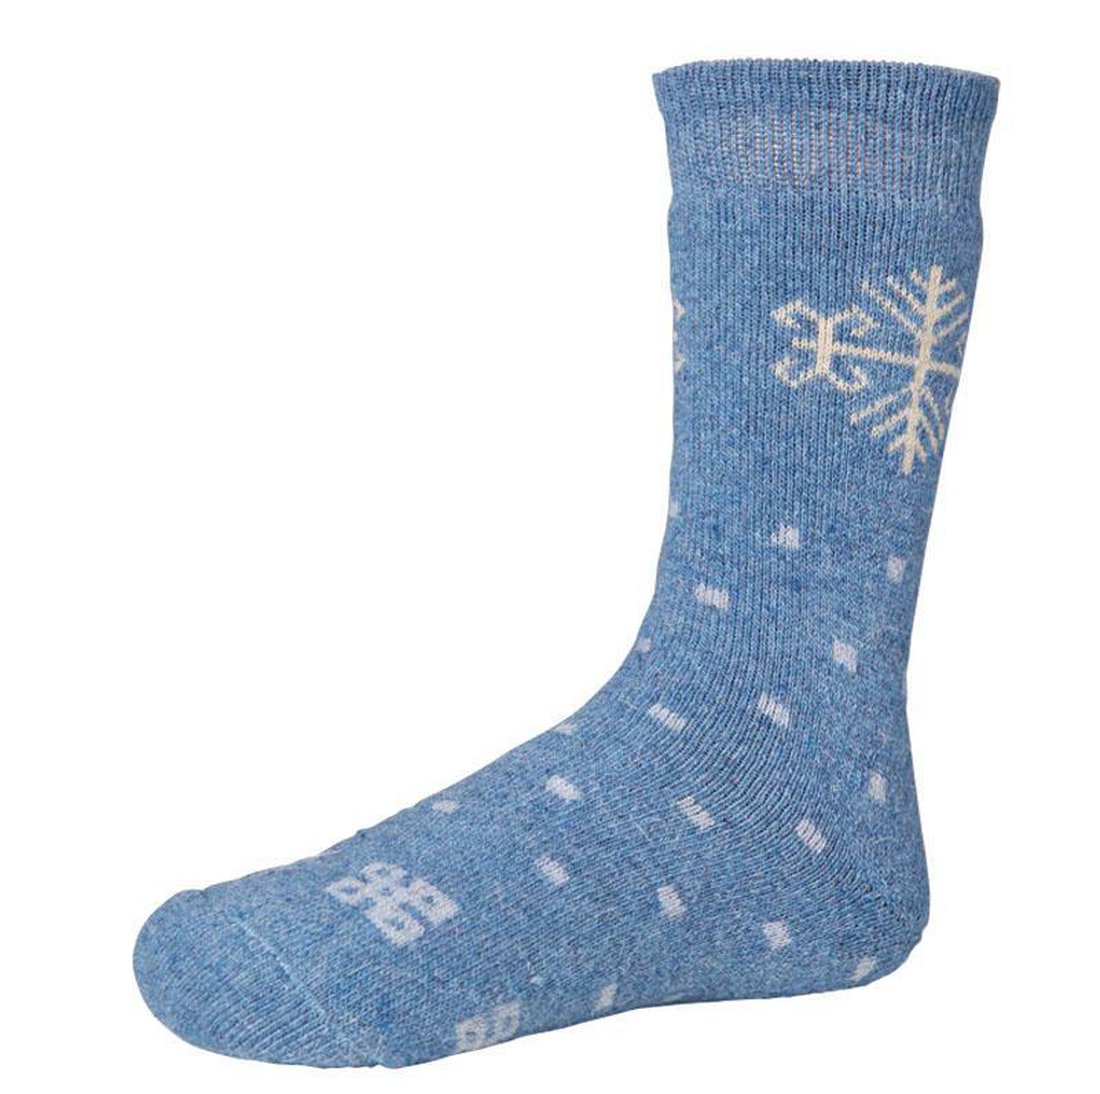 Ysabel Mora 12720 Snowflake Sock - Warm and cozy thick knitted blue socks with a touch of wool and angora, with a snowflake motif and all over dotted square pattern.